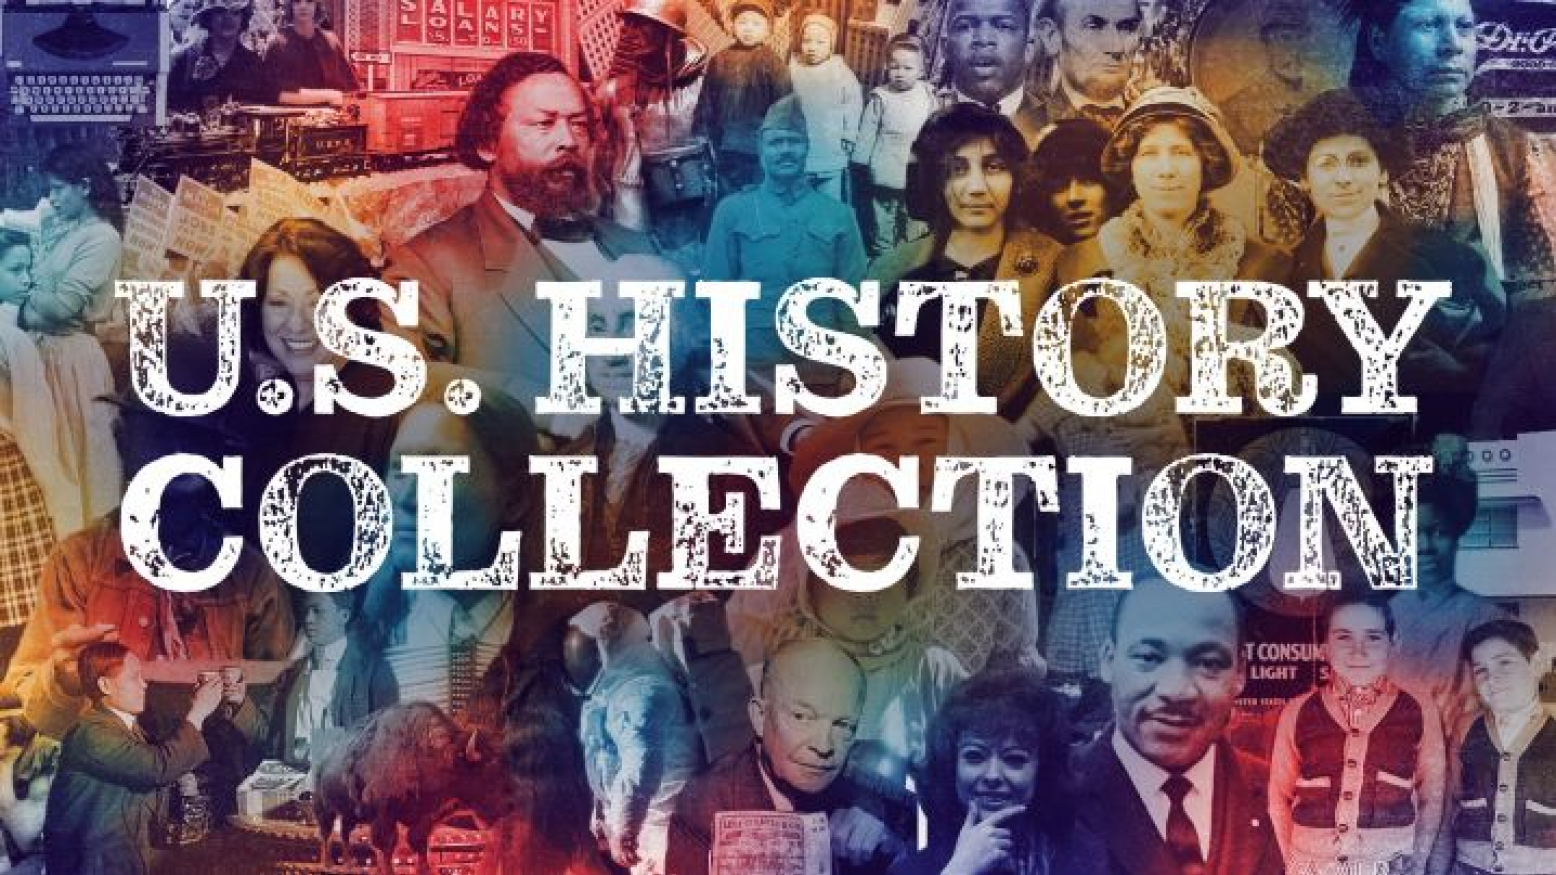 A bright, multicolored graphic with "U.S. History Collection" in white text featured prominently. In the background are many historical images and portraits of prominent historical figures.